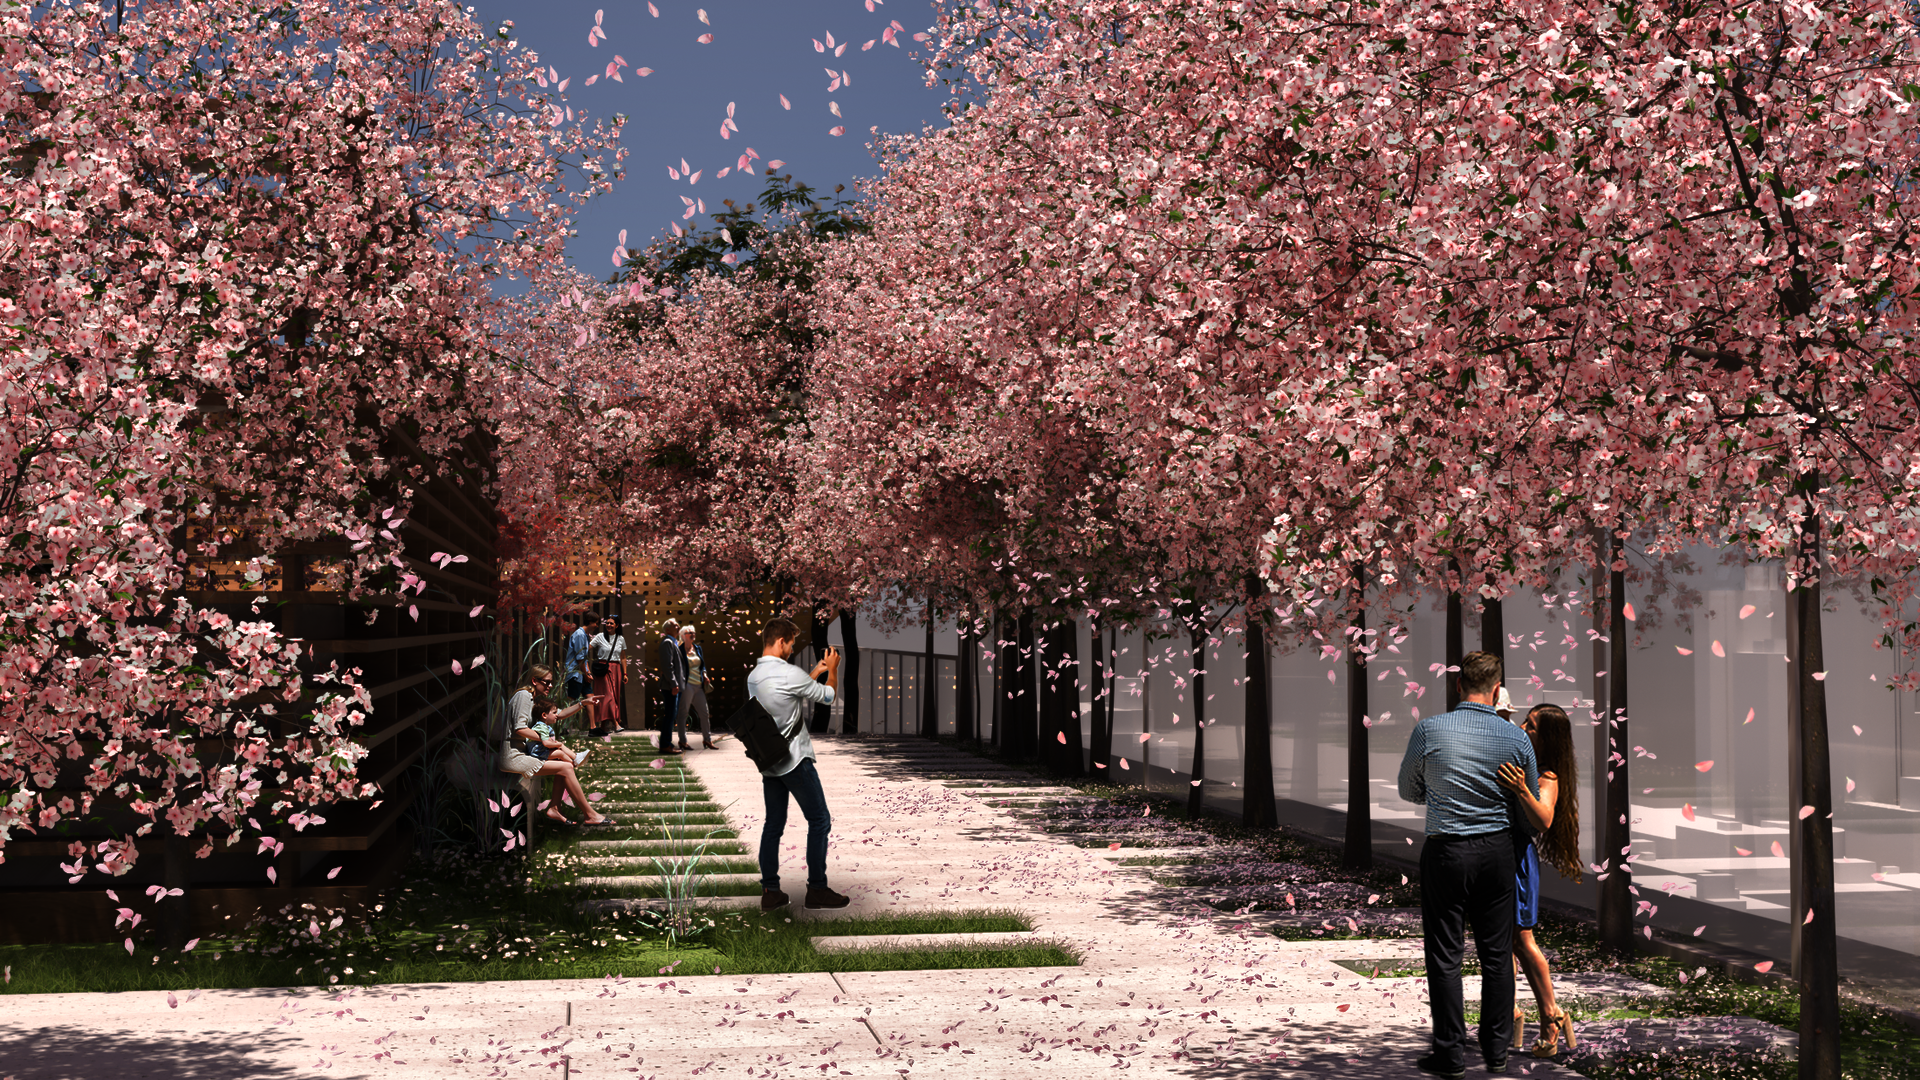 Walking trail presents a vibrant spring adorned with an abundance of cherry blossoms. This picturesque scene is a delightful attraction, appealing not only to individual visitors but also to families seeking a memorable experience amidst nature's beauty.